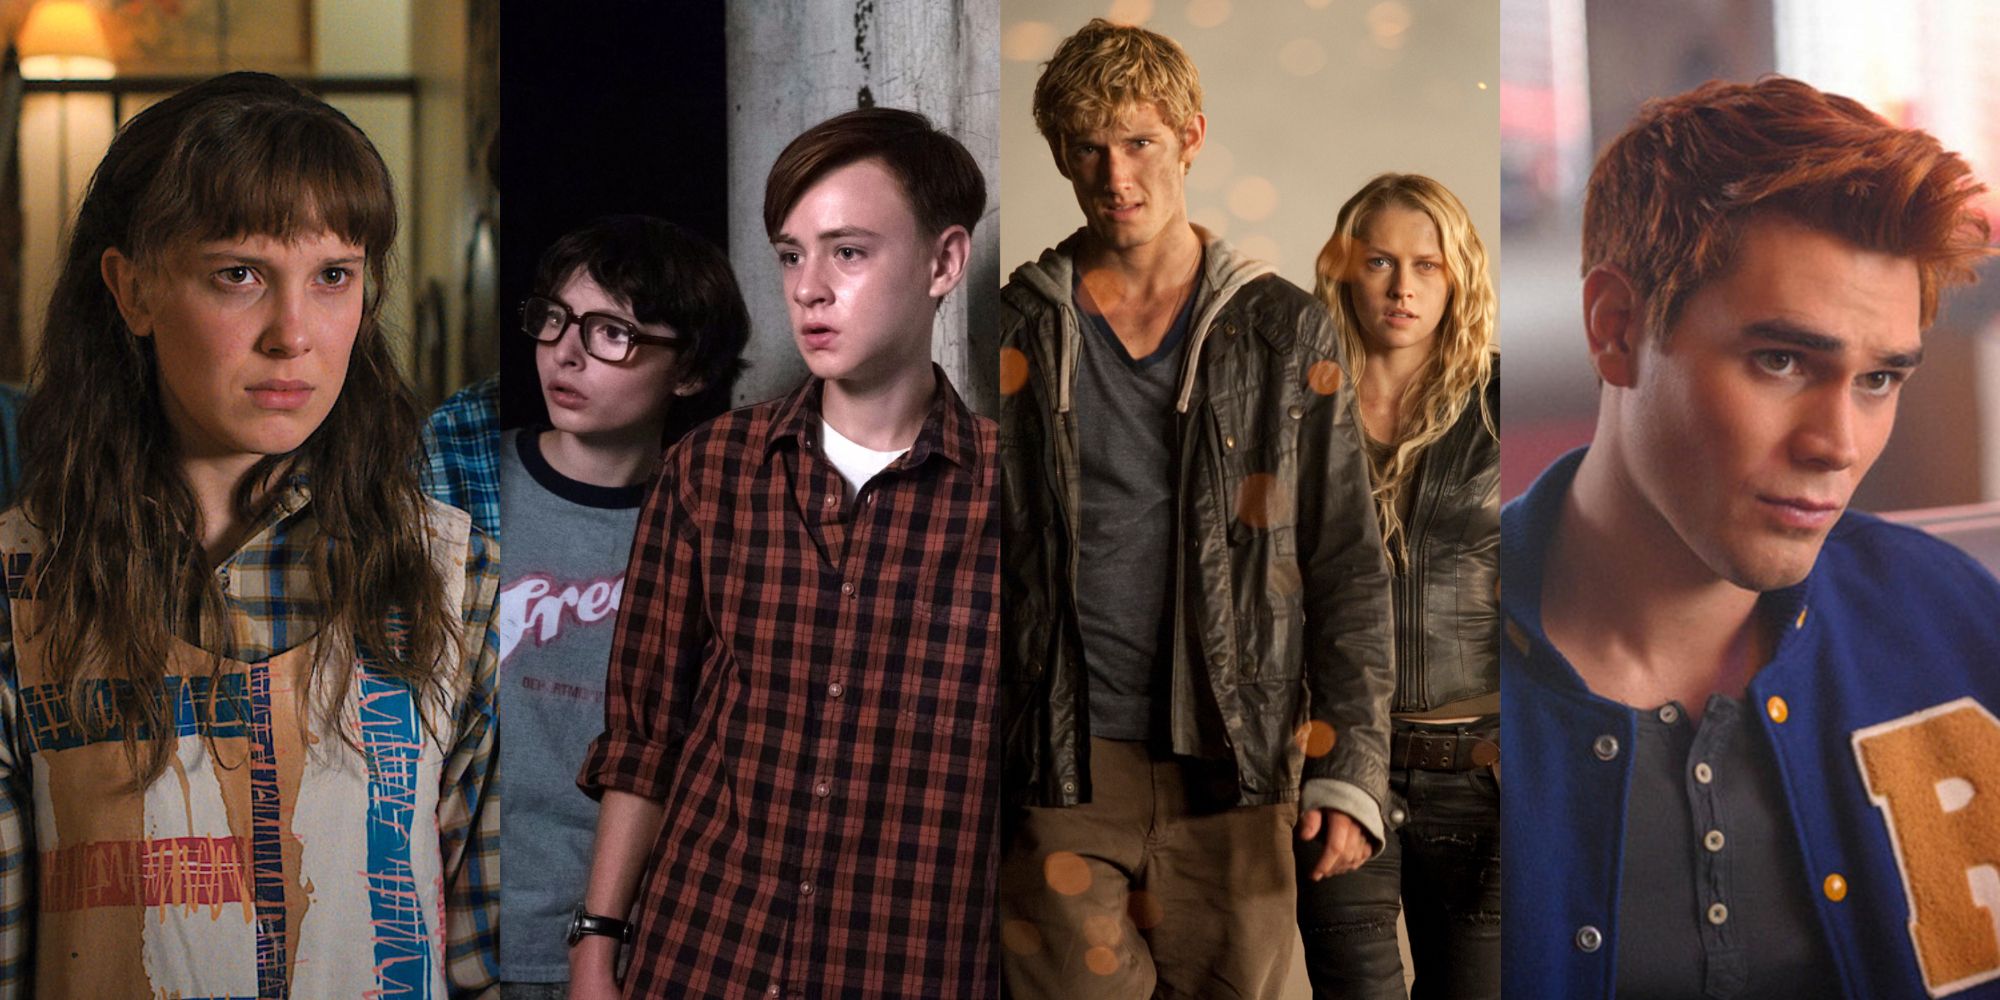 Super 8' & 8 Other Movies & TV Shows To Watch After Paper Girls